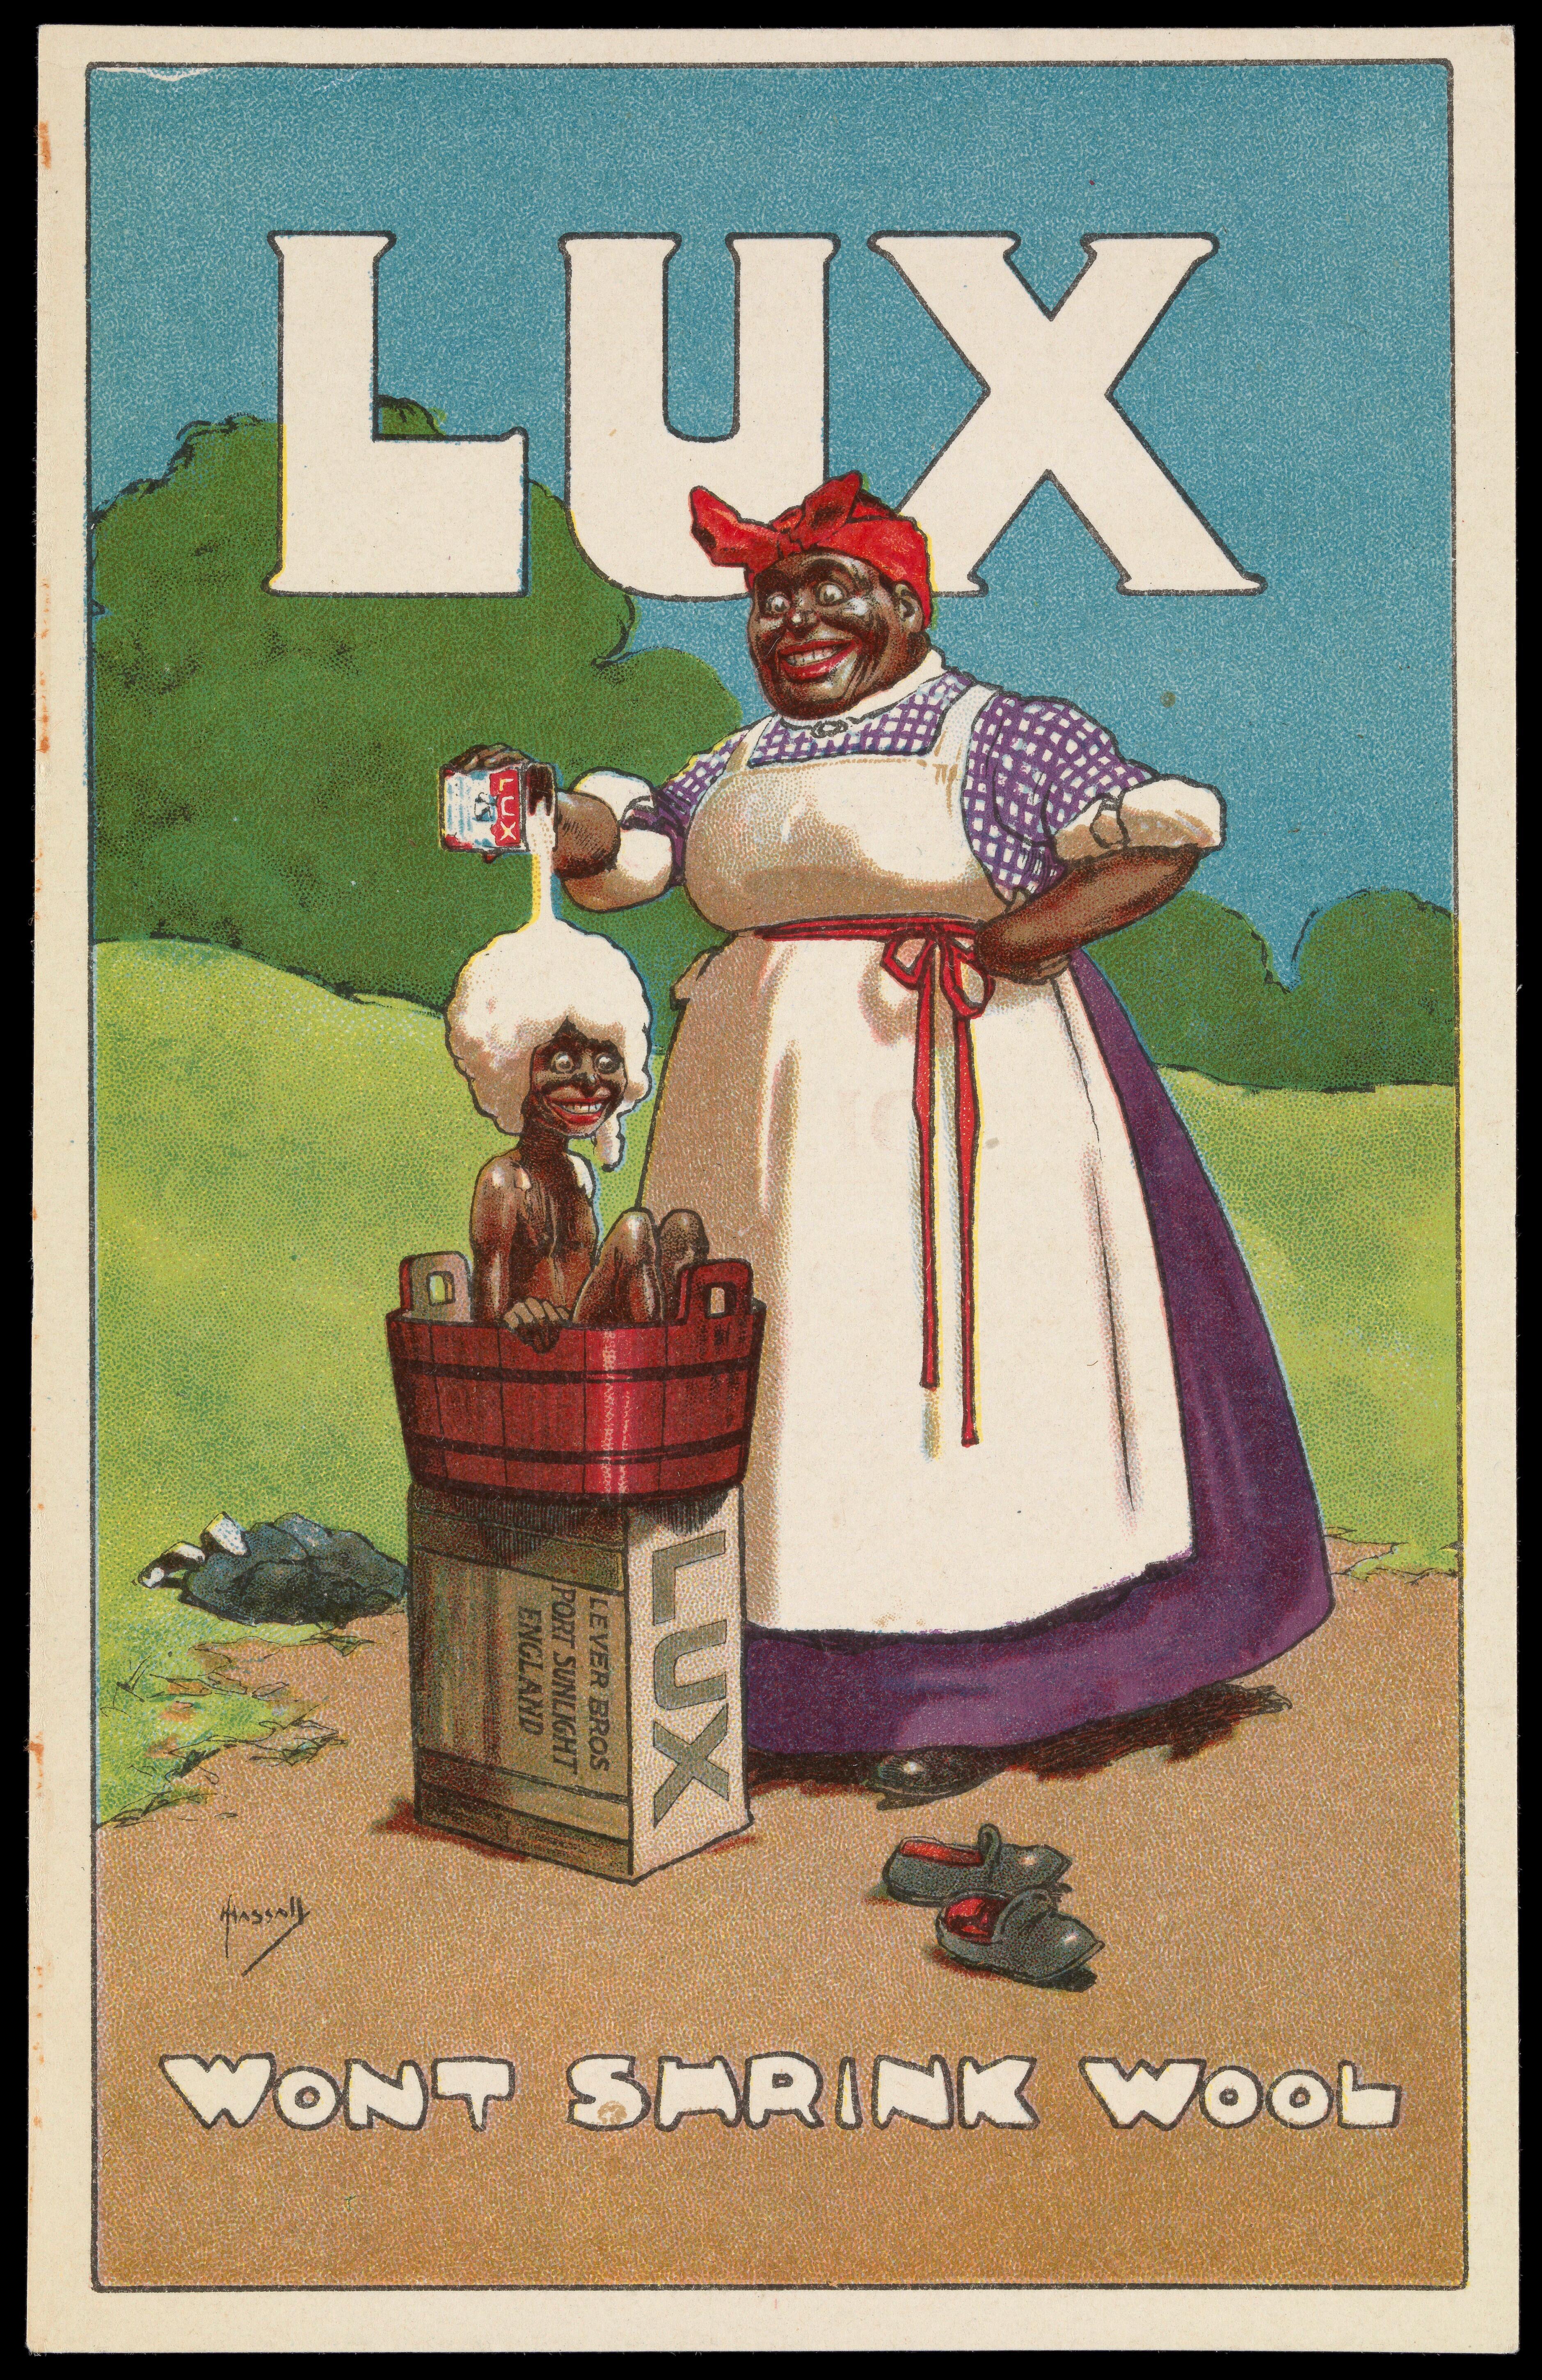 Lux advert - text: 'Lux won't shrink wool', illustration is a black woman pouring the product on a black child's hair